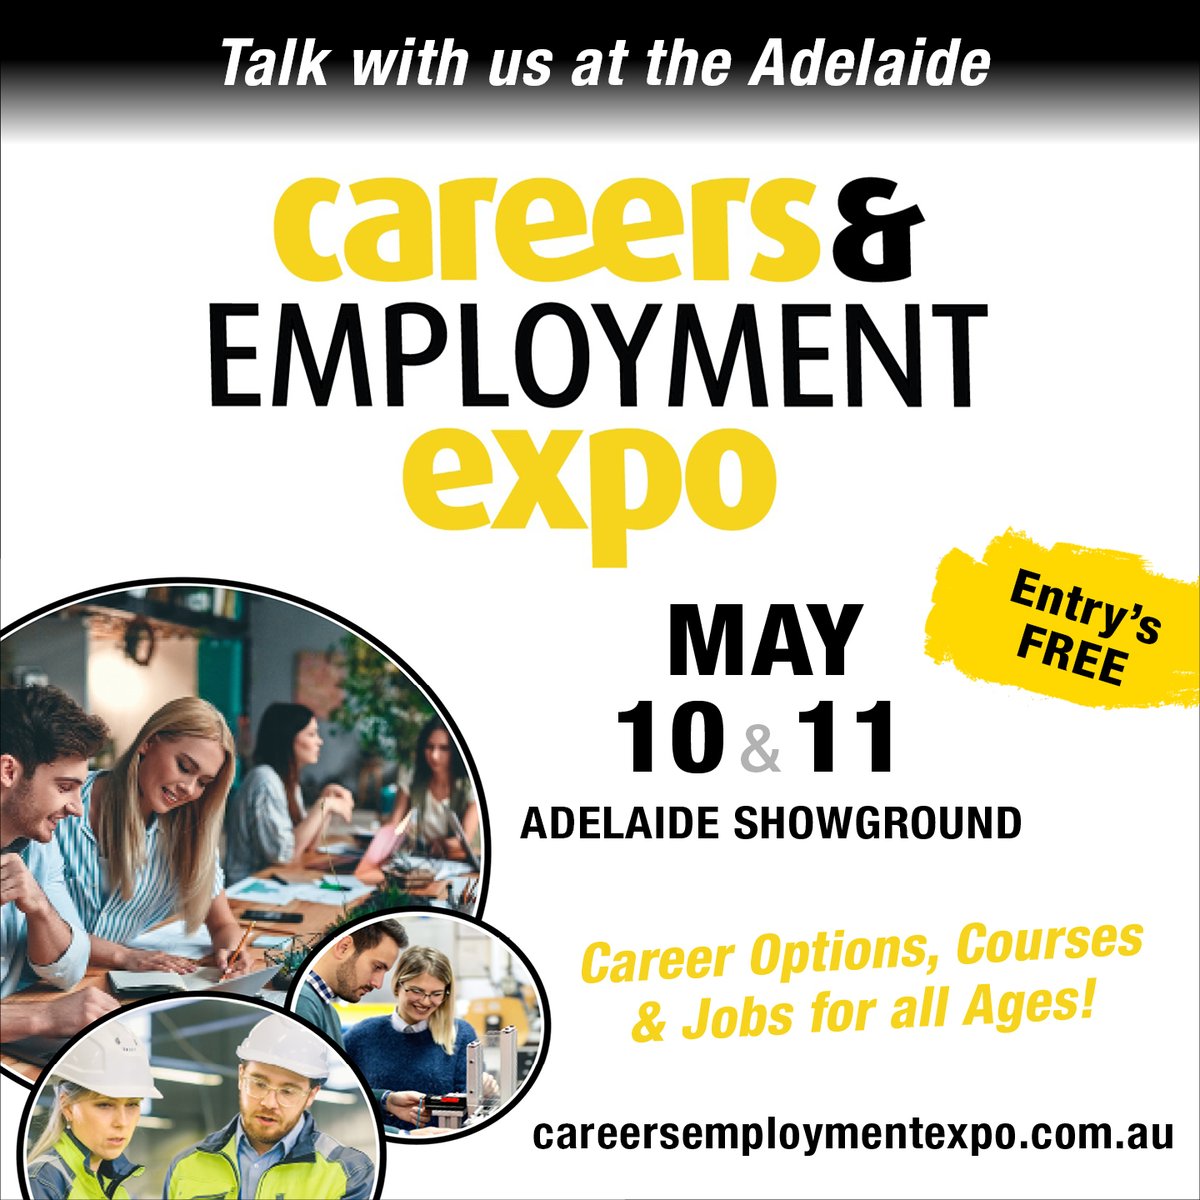 Join us at the Adelaide Career & Employment Expo from 10th May to 11th May! 🎉

Explore endless career options, discover new courses, and uncover job opportunities for all ages.🚀 

#AdelaideCareerExpo #CareerOpportunities #ICBCommunity #ICBAustralia